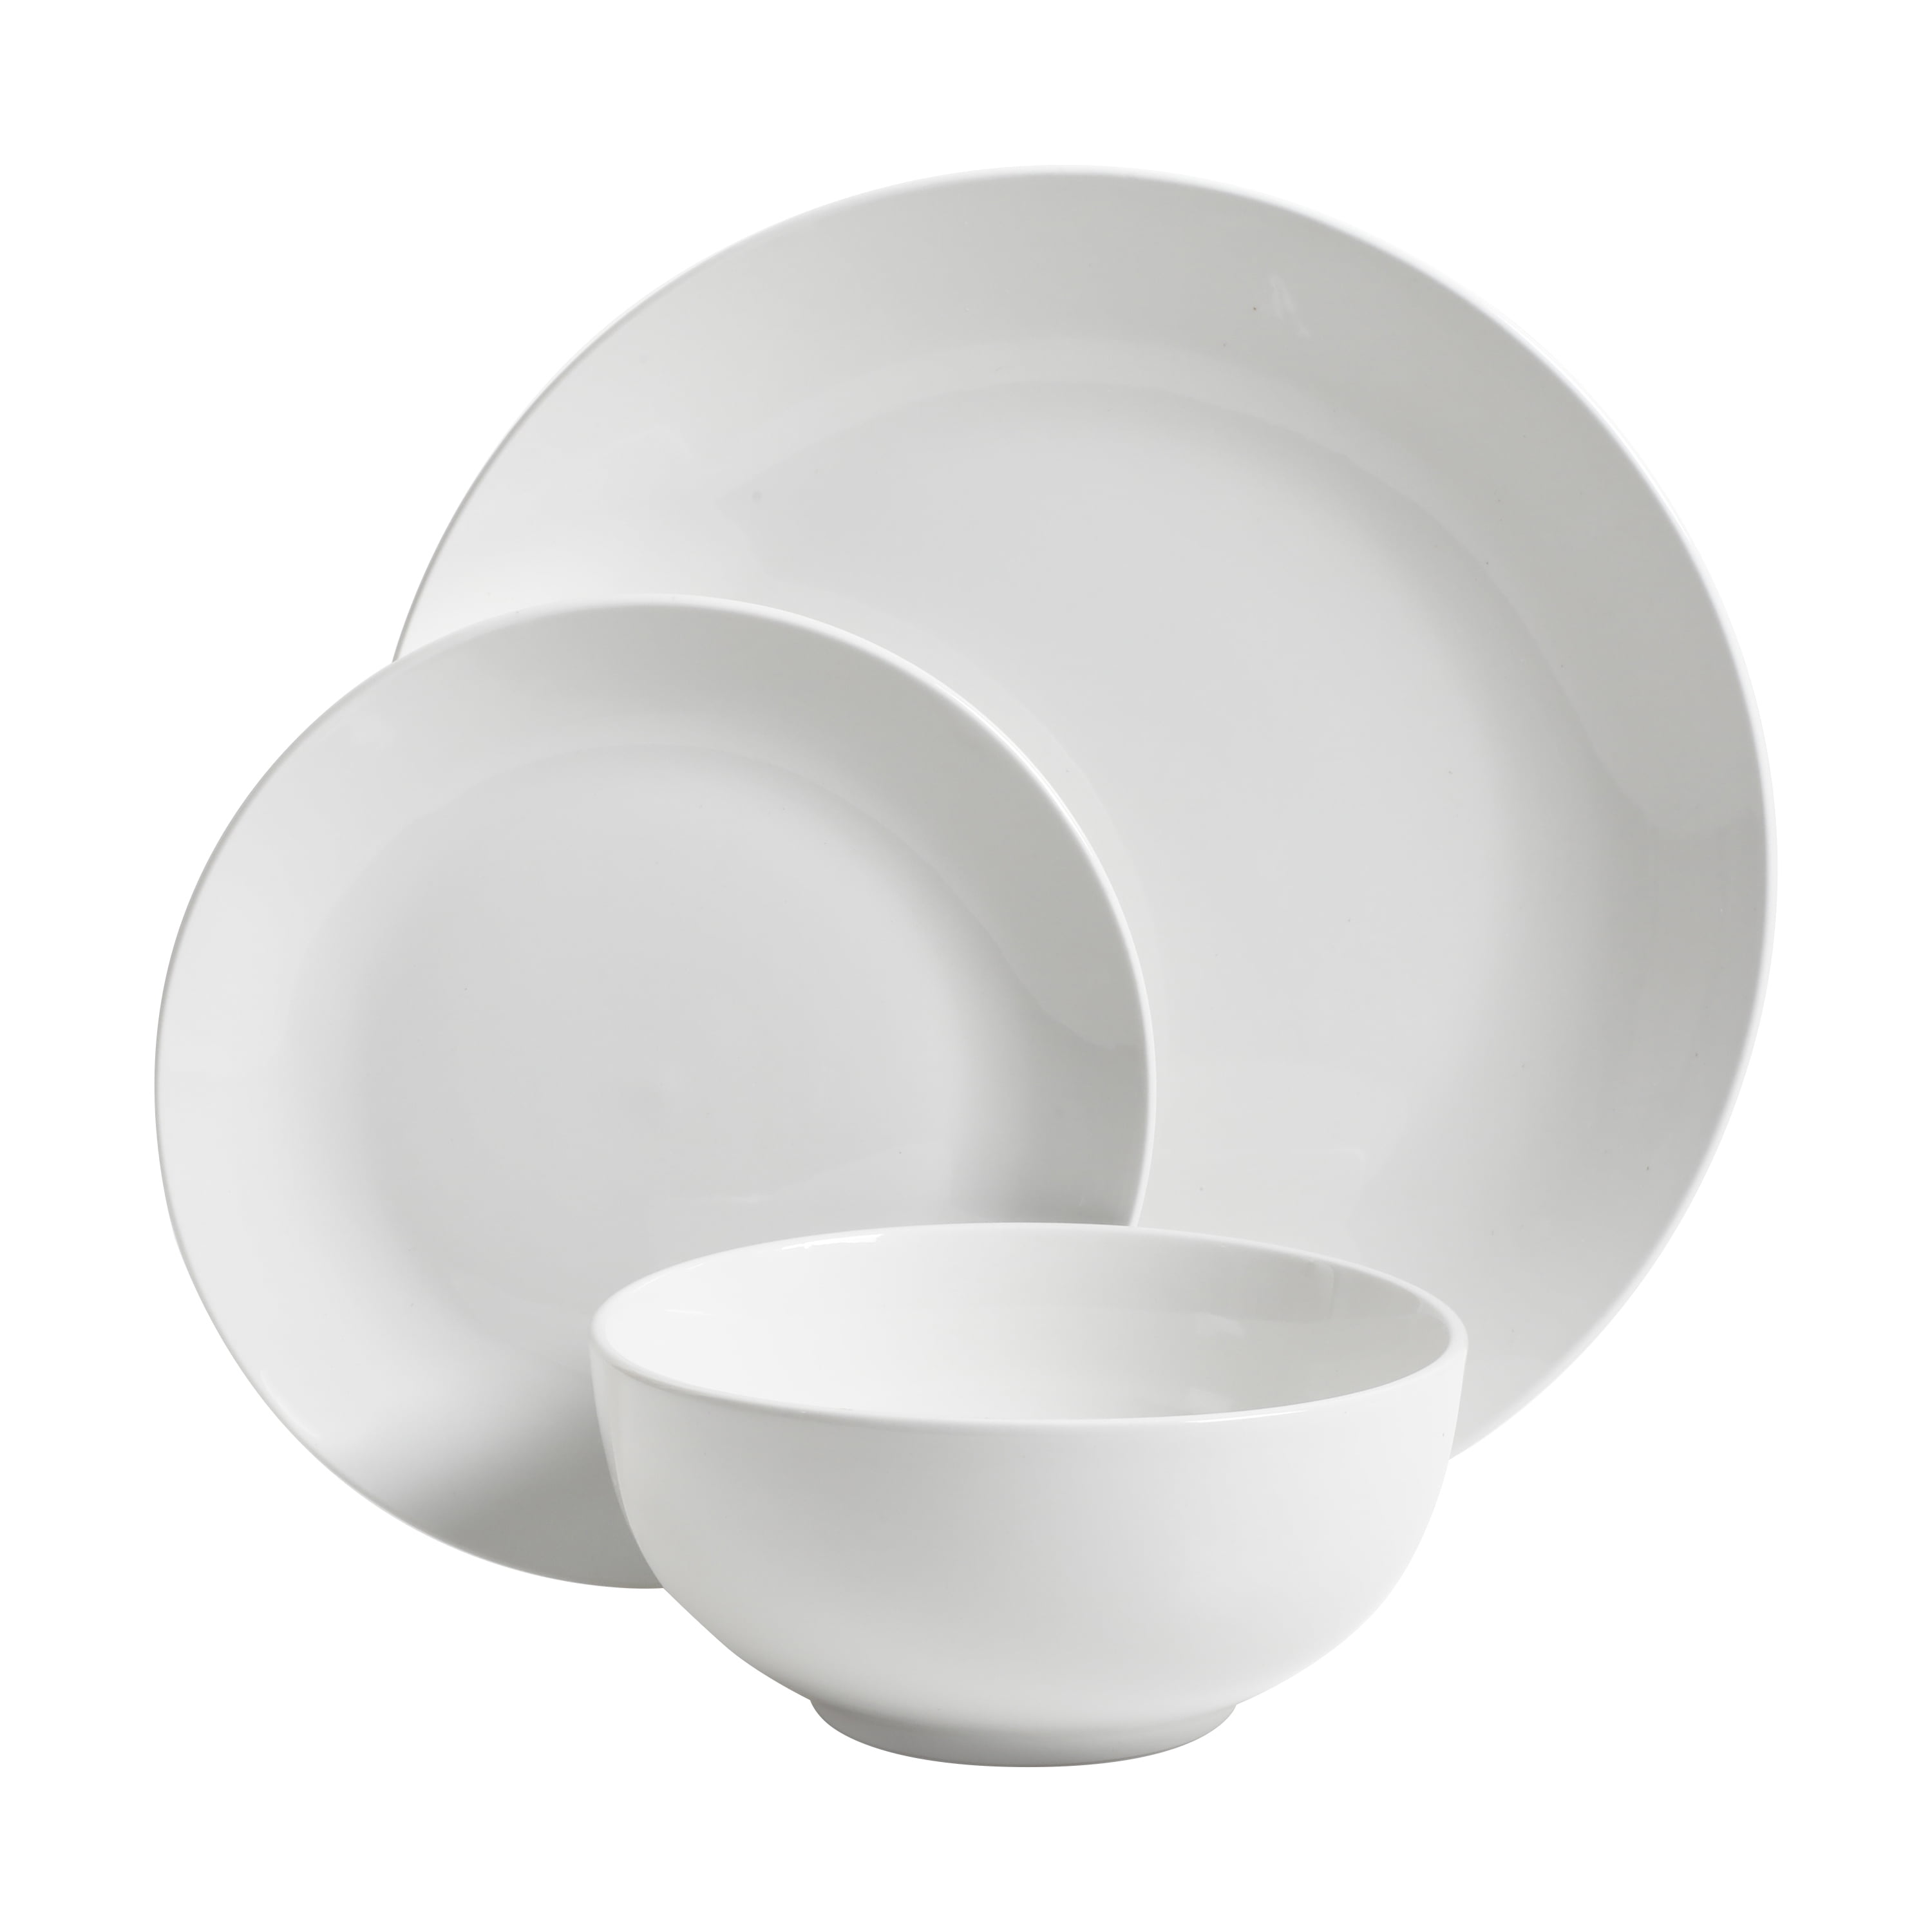 Sale > gibson everyday dishes > in stock